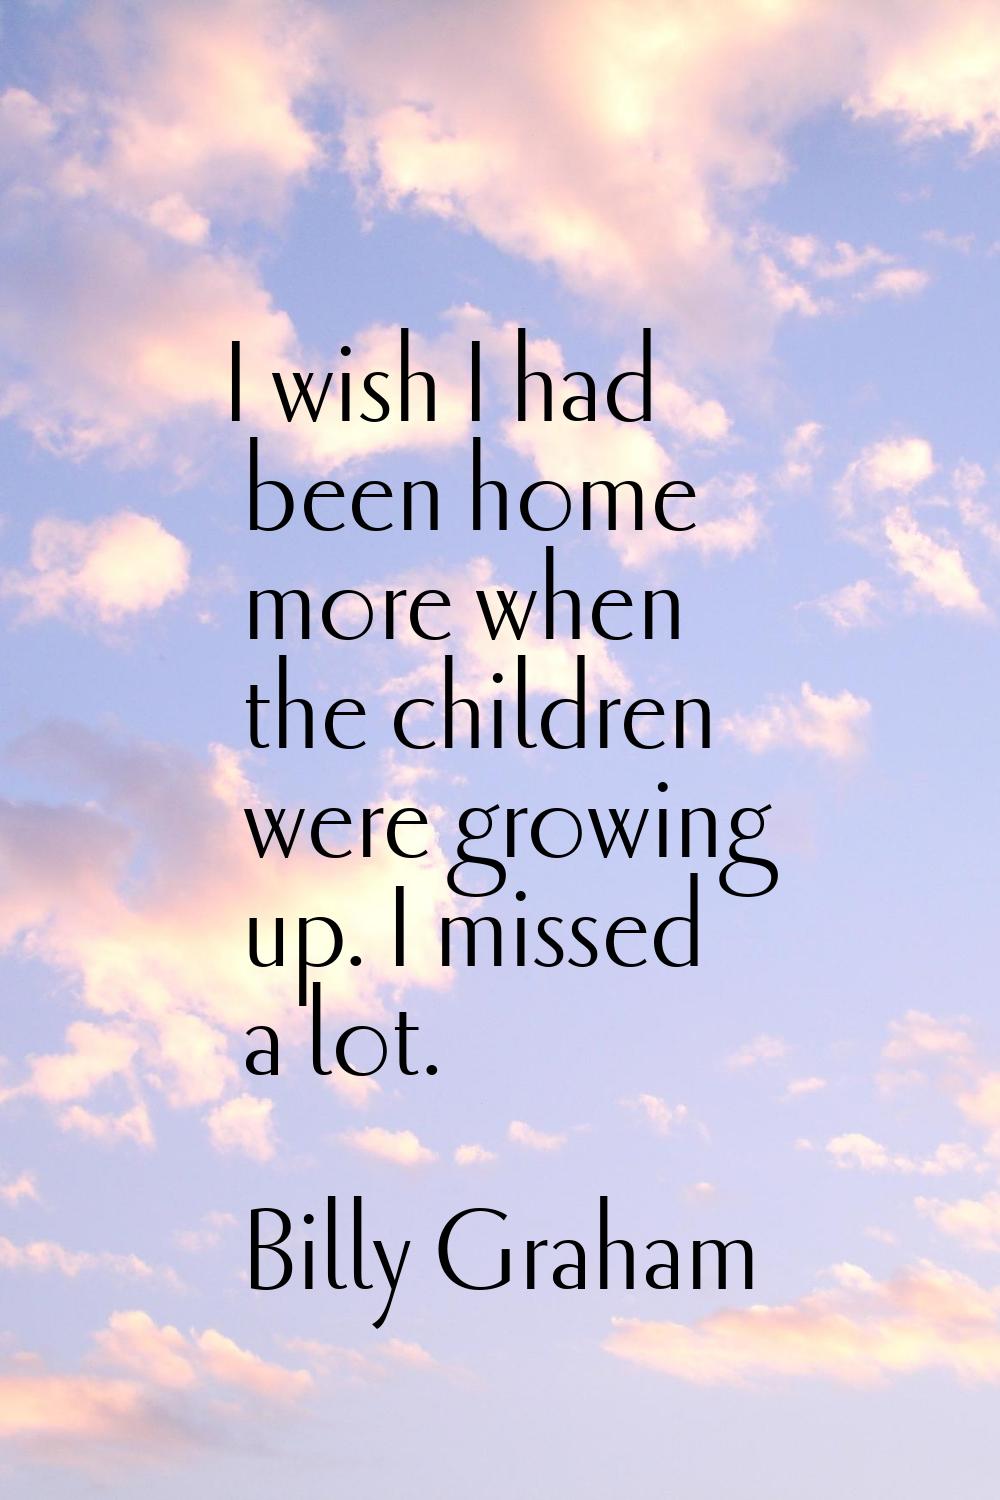 I wish I had been home more when the children were growing up. I missed a lot.